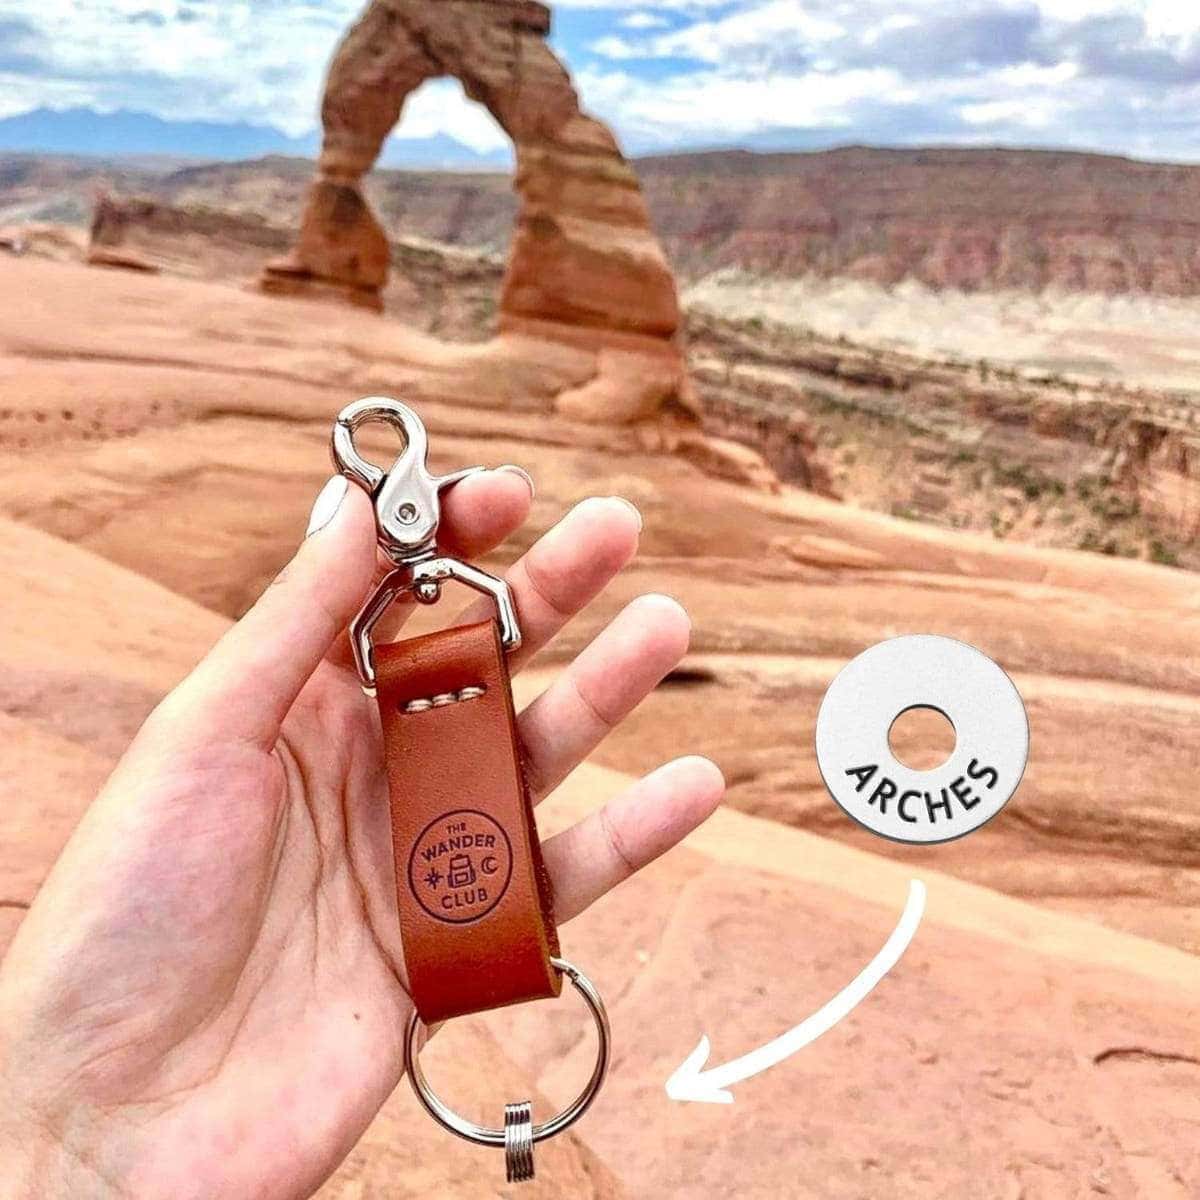 50+ Thoughtful Gifts for National Park Lovers national park gift idea wander club